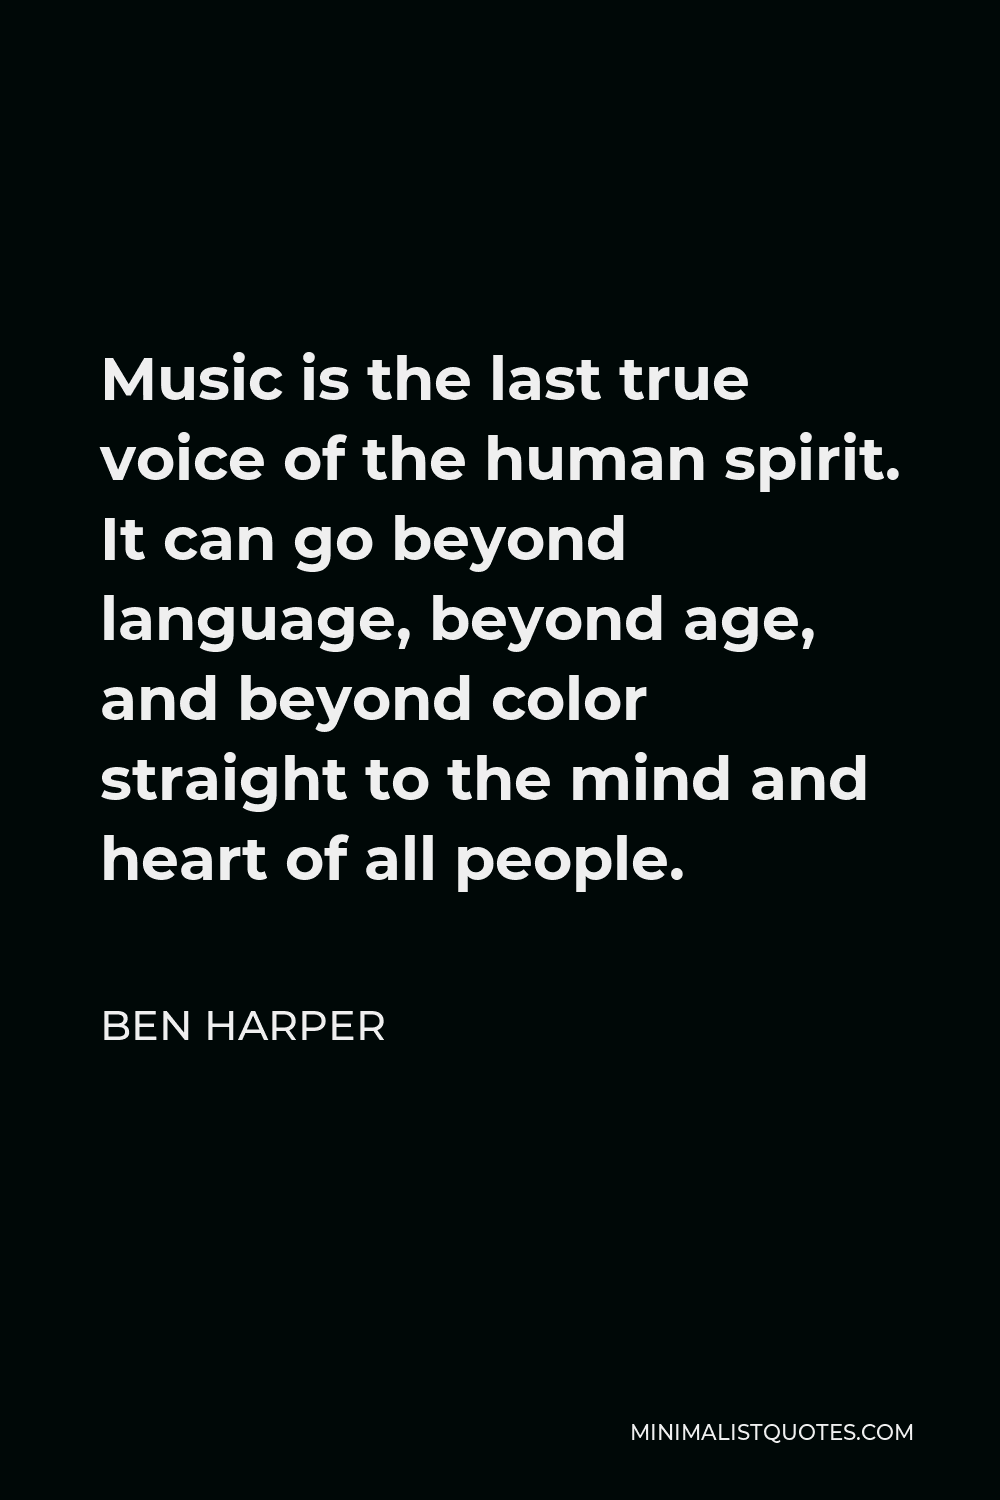 Ben Harper Quote - Music is the last true voice of the human spirit. It can go beyond language, beyond age, and beyond color straight to the mind and heart of all people.